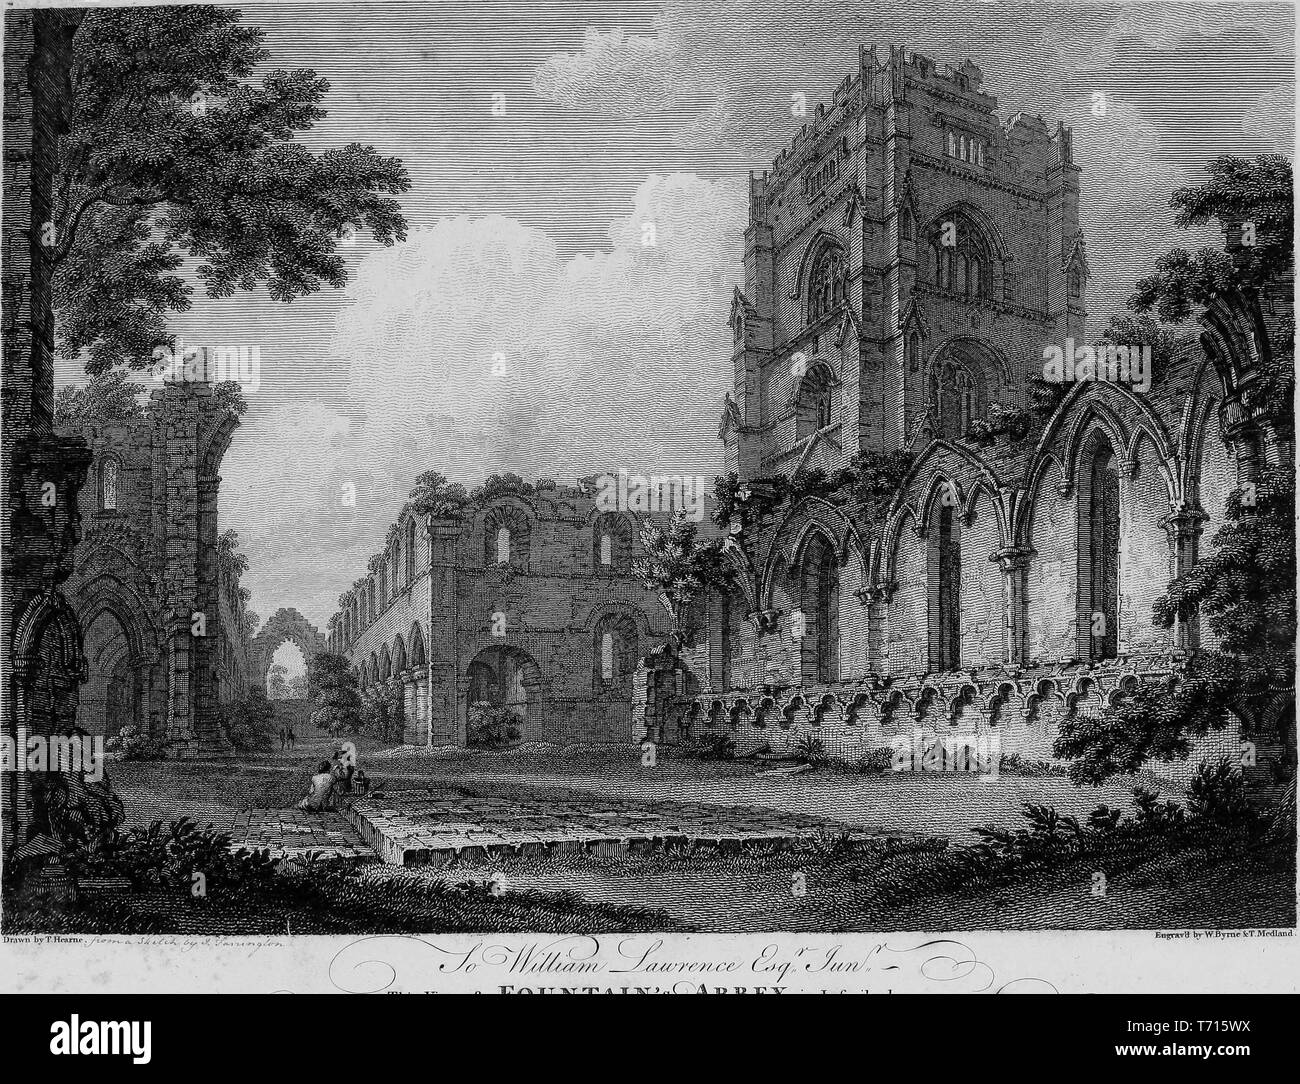 Engraving of the Fountains Abbey in Ripon, North Yorkshire, England, from the book 'Antiquities of Great Britain' by William Byrne and Thomas Hearne, 1807. Courtesy Internet Archive. () Stock Photo